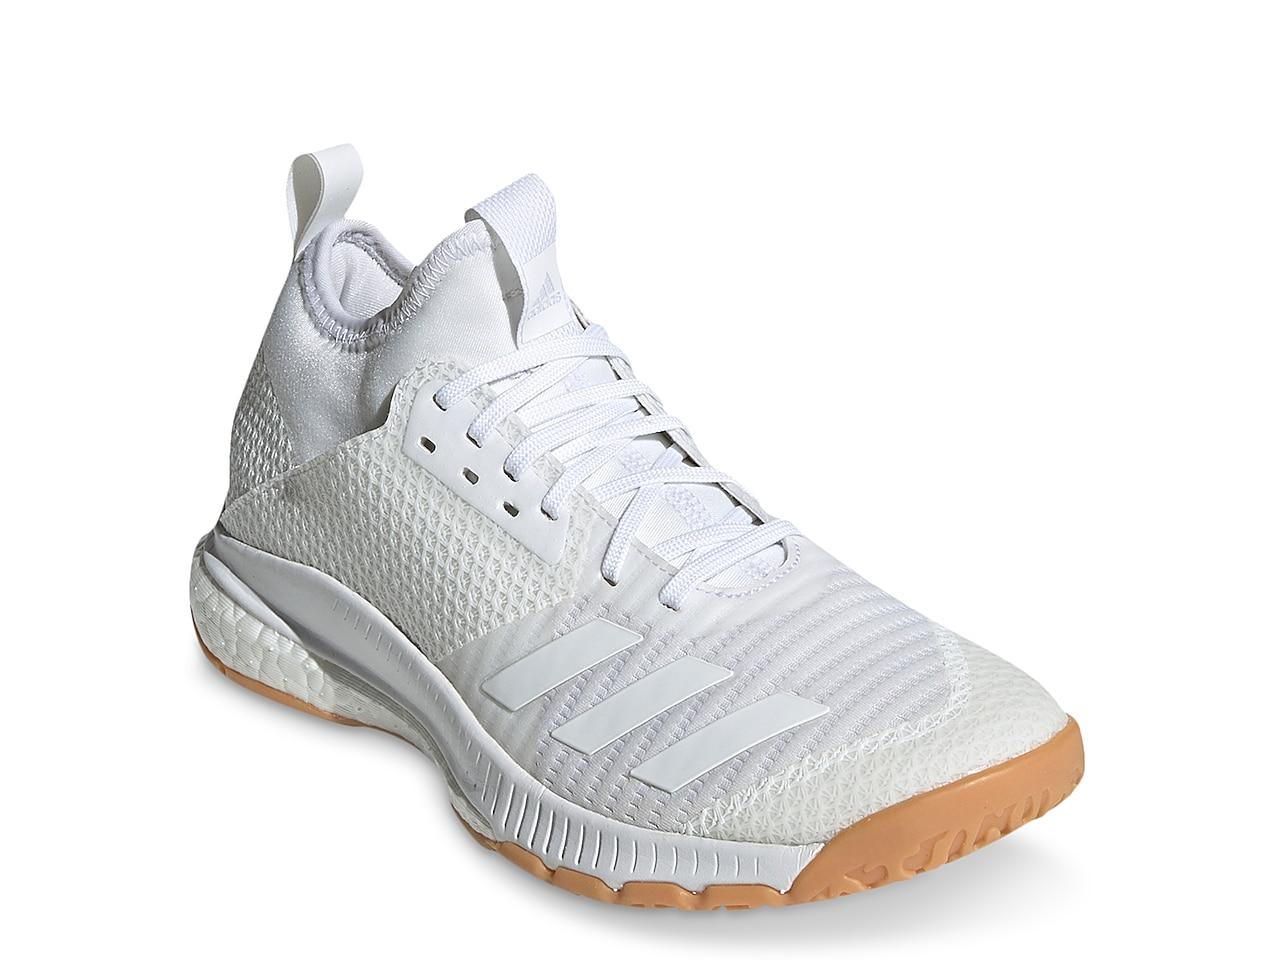 adidas Rubber Crazyflight Bounce 3 in White - Save 75% - Lyst